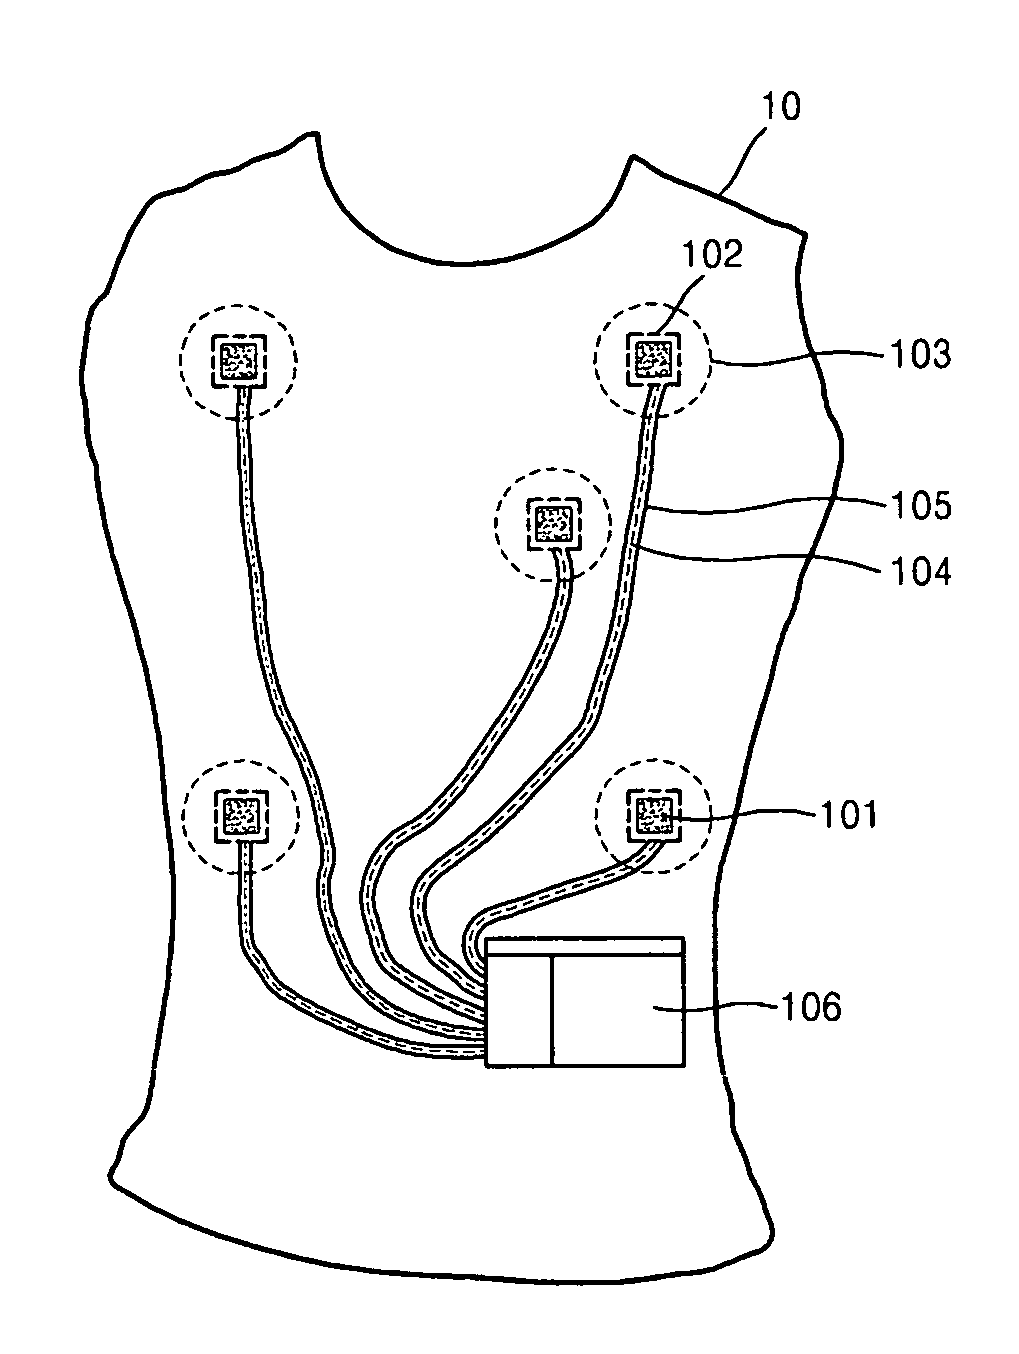 Garment for measuring physiological signal